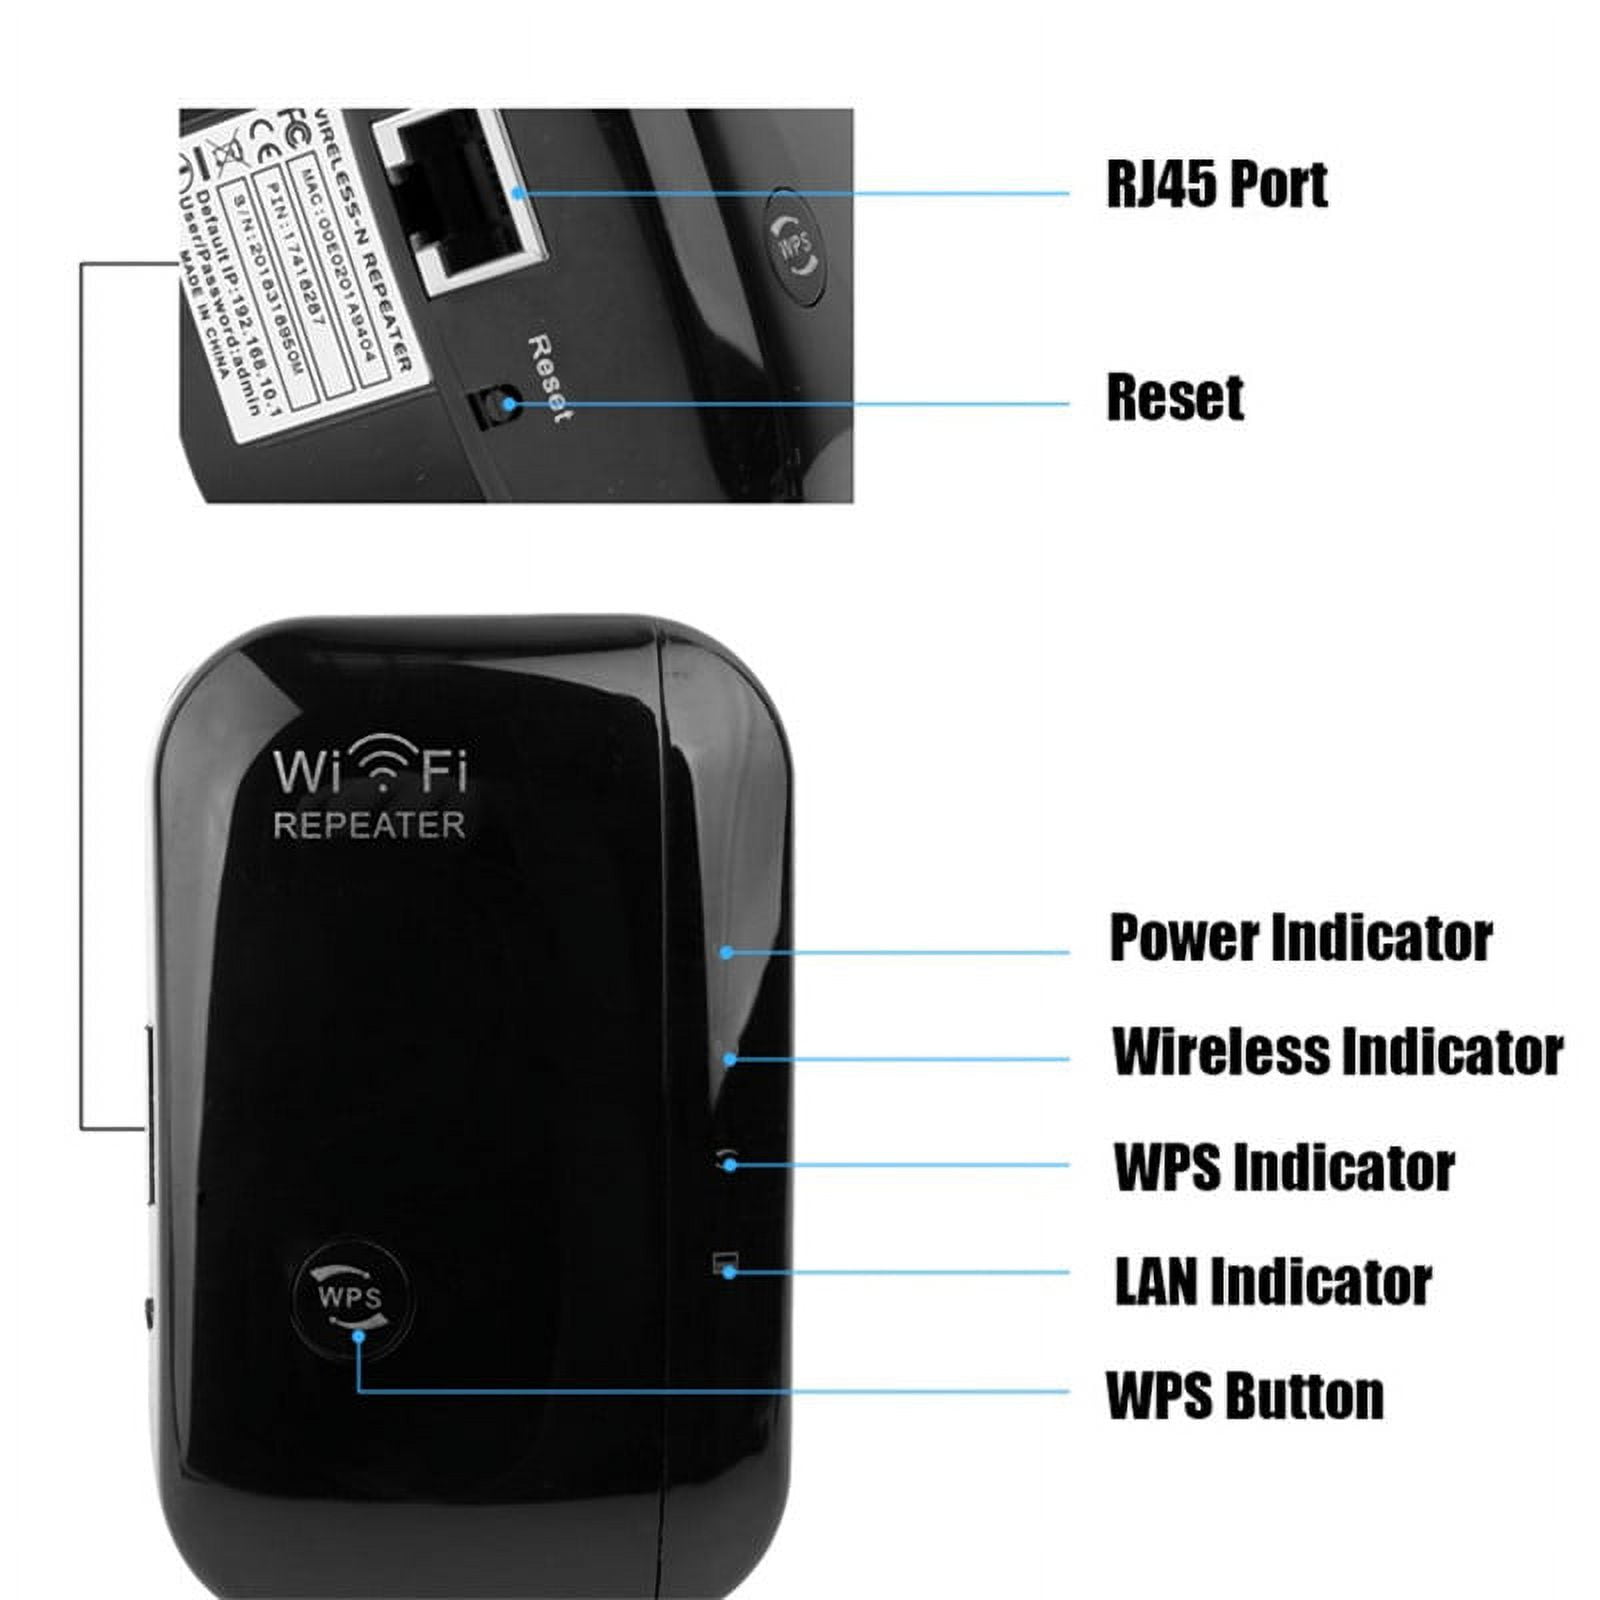 How to setup wireless N Wifi Repeater using 192.168.10.1?